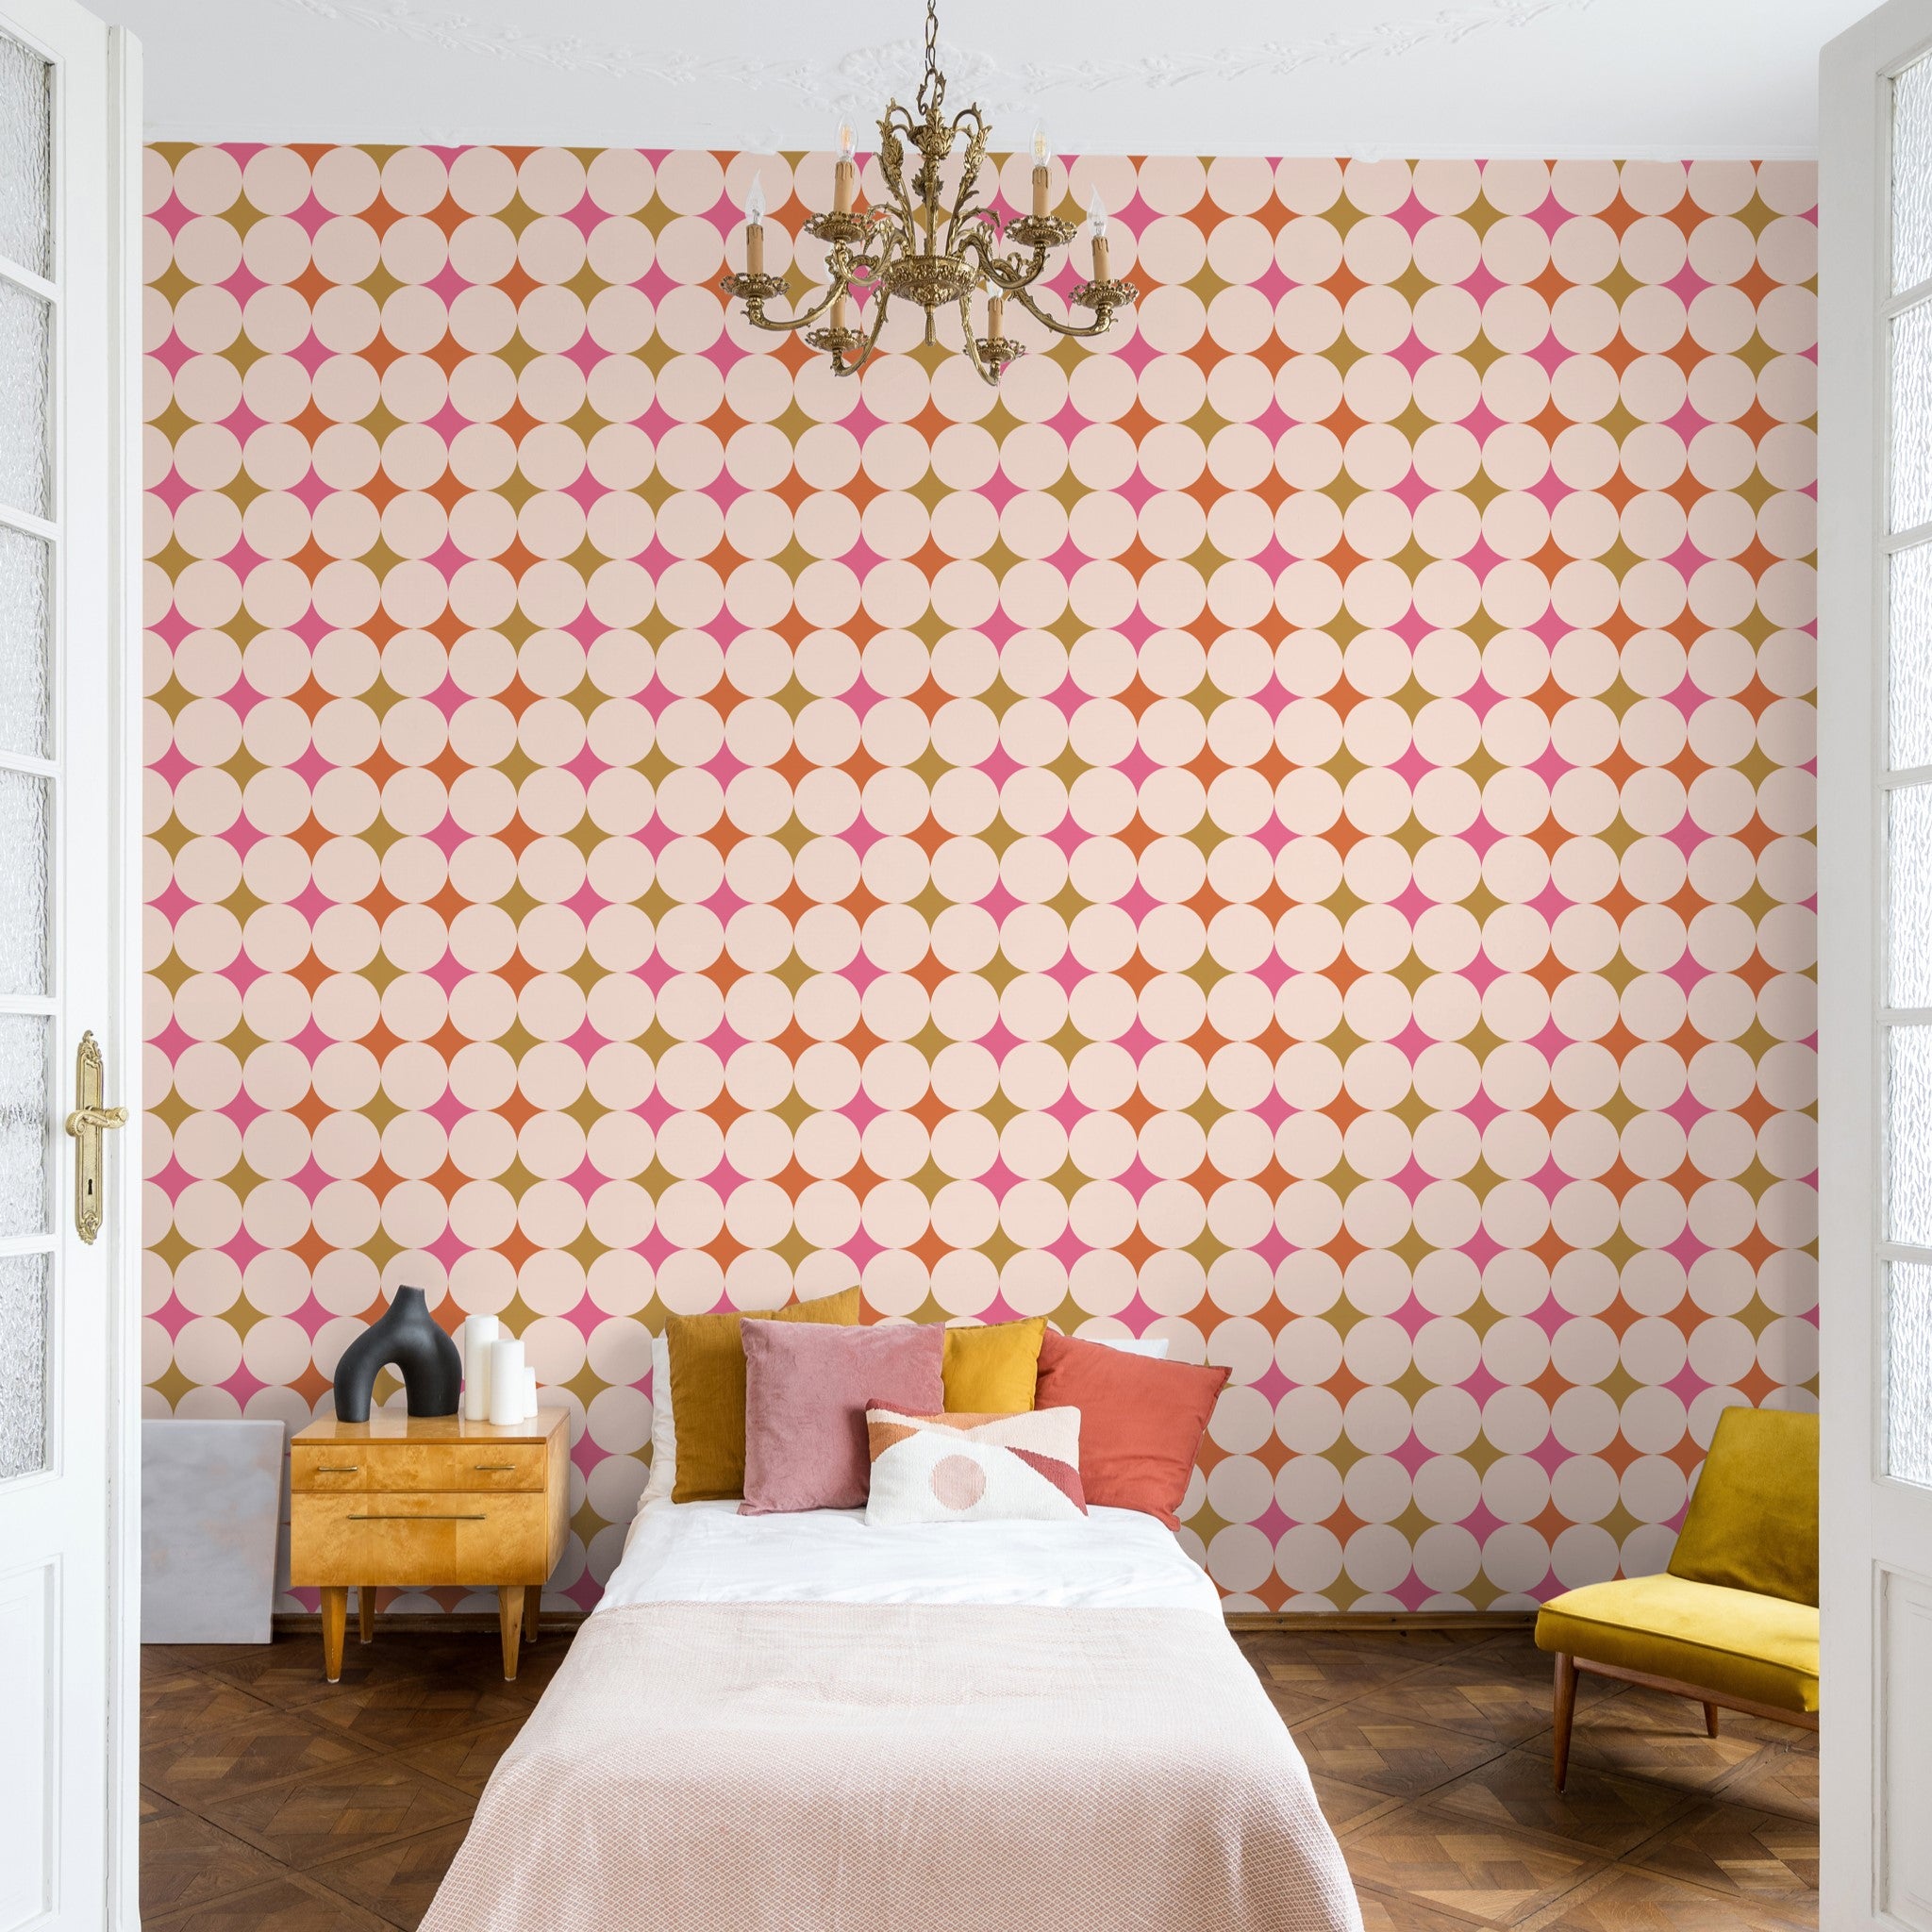 "Starry Wallpaper by Wall Blush accentuating a bedroom's interior with patterned focus wall design."